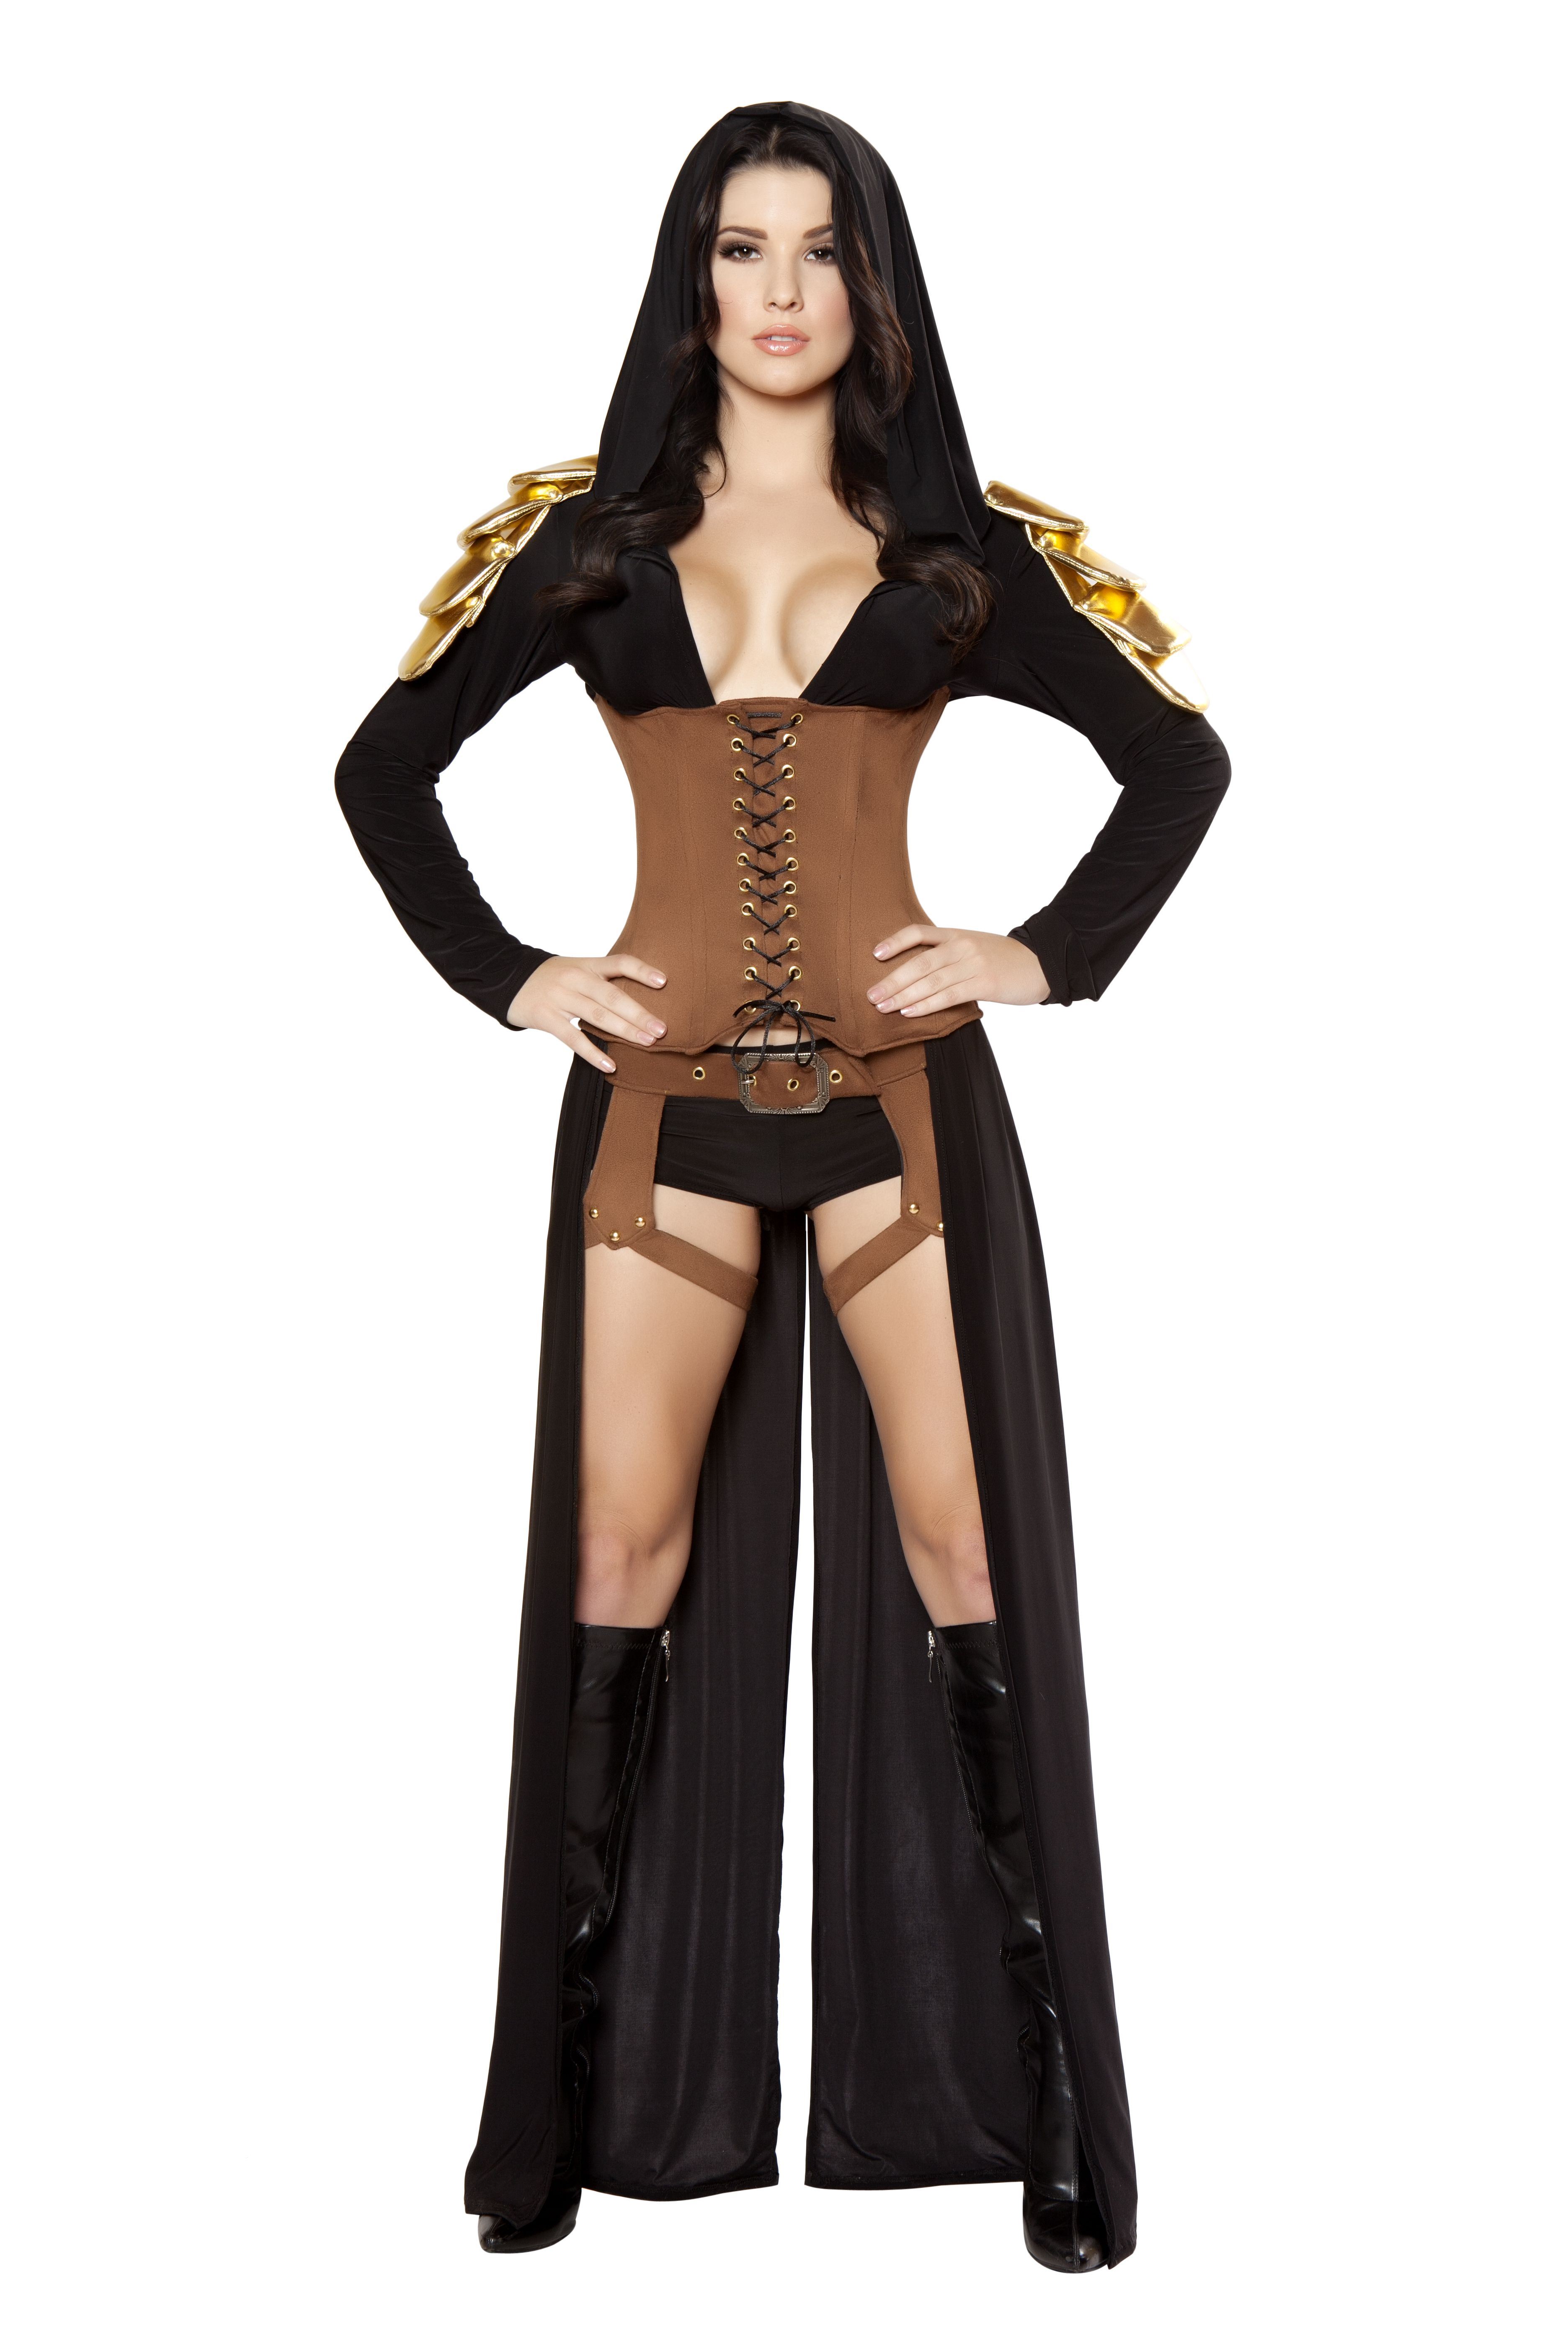 Adult Woman Costumes 3